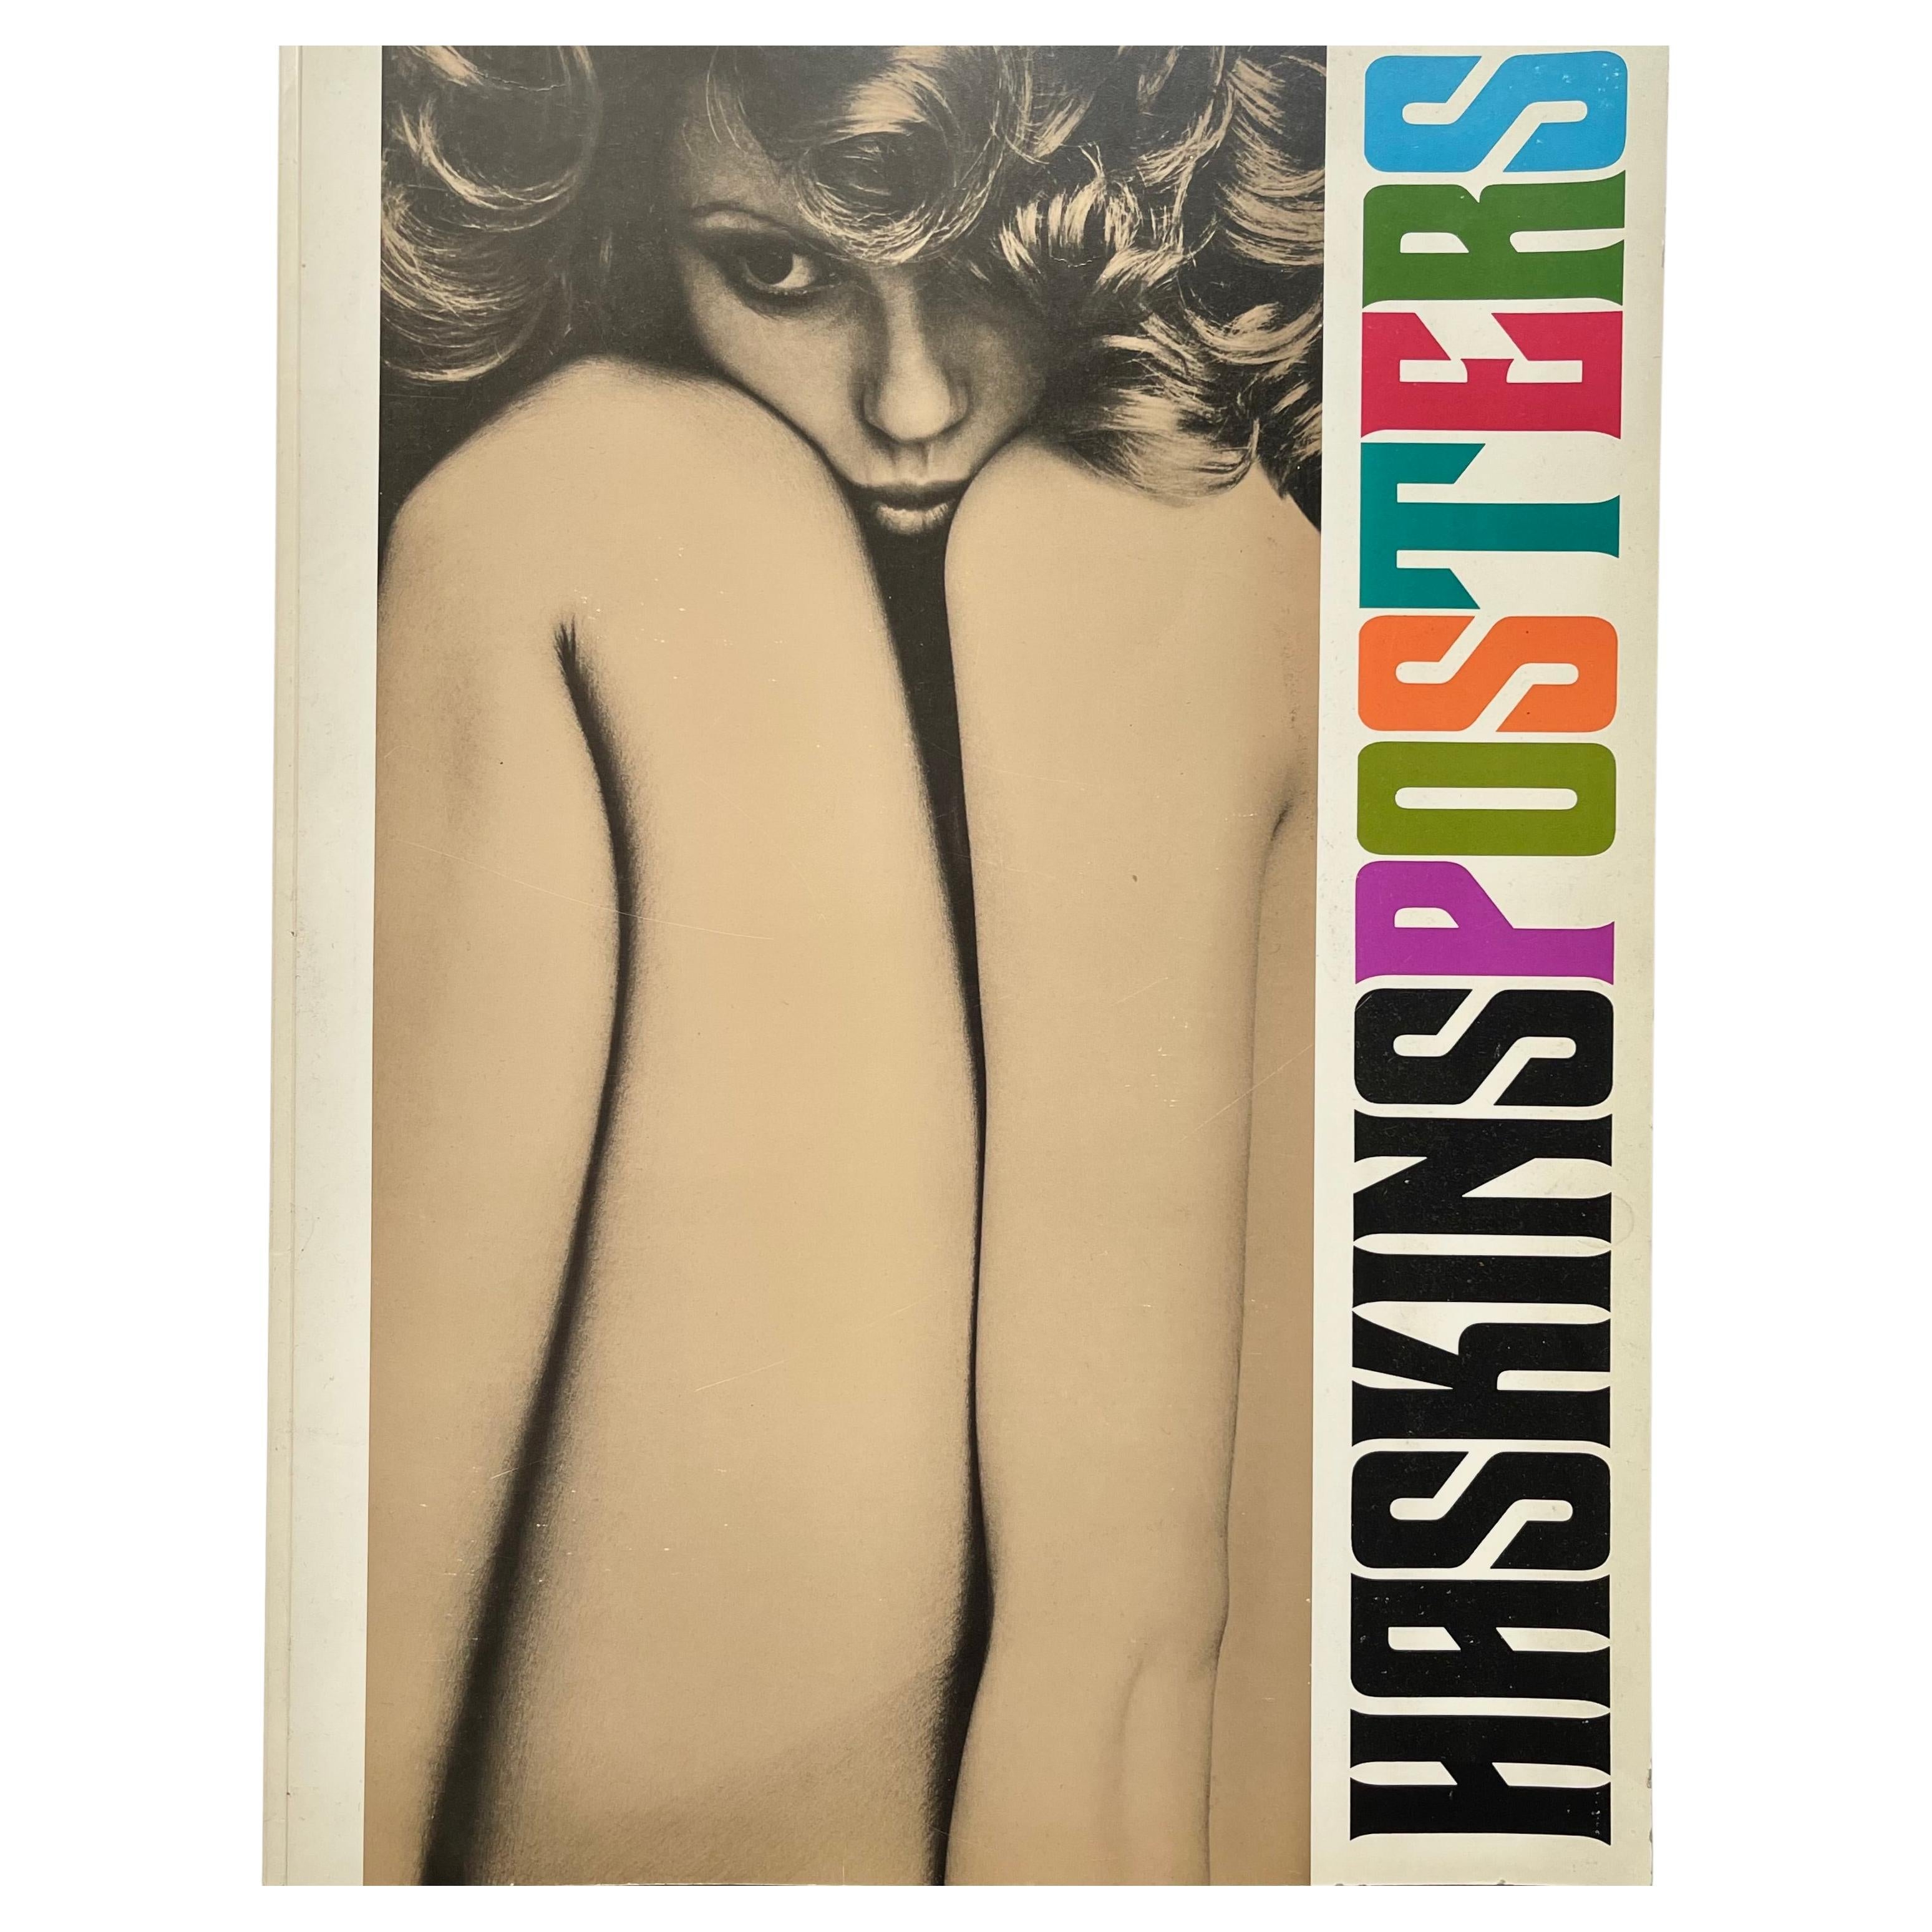 Haskins Posters by Sam Haskin 1st Edition 1972